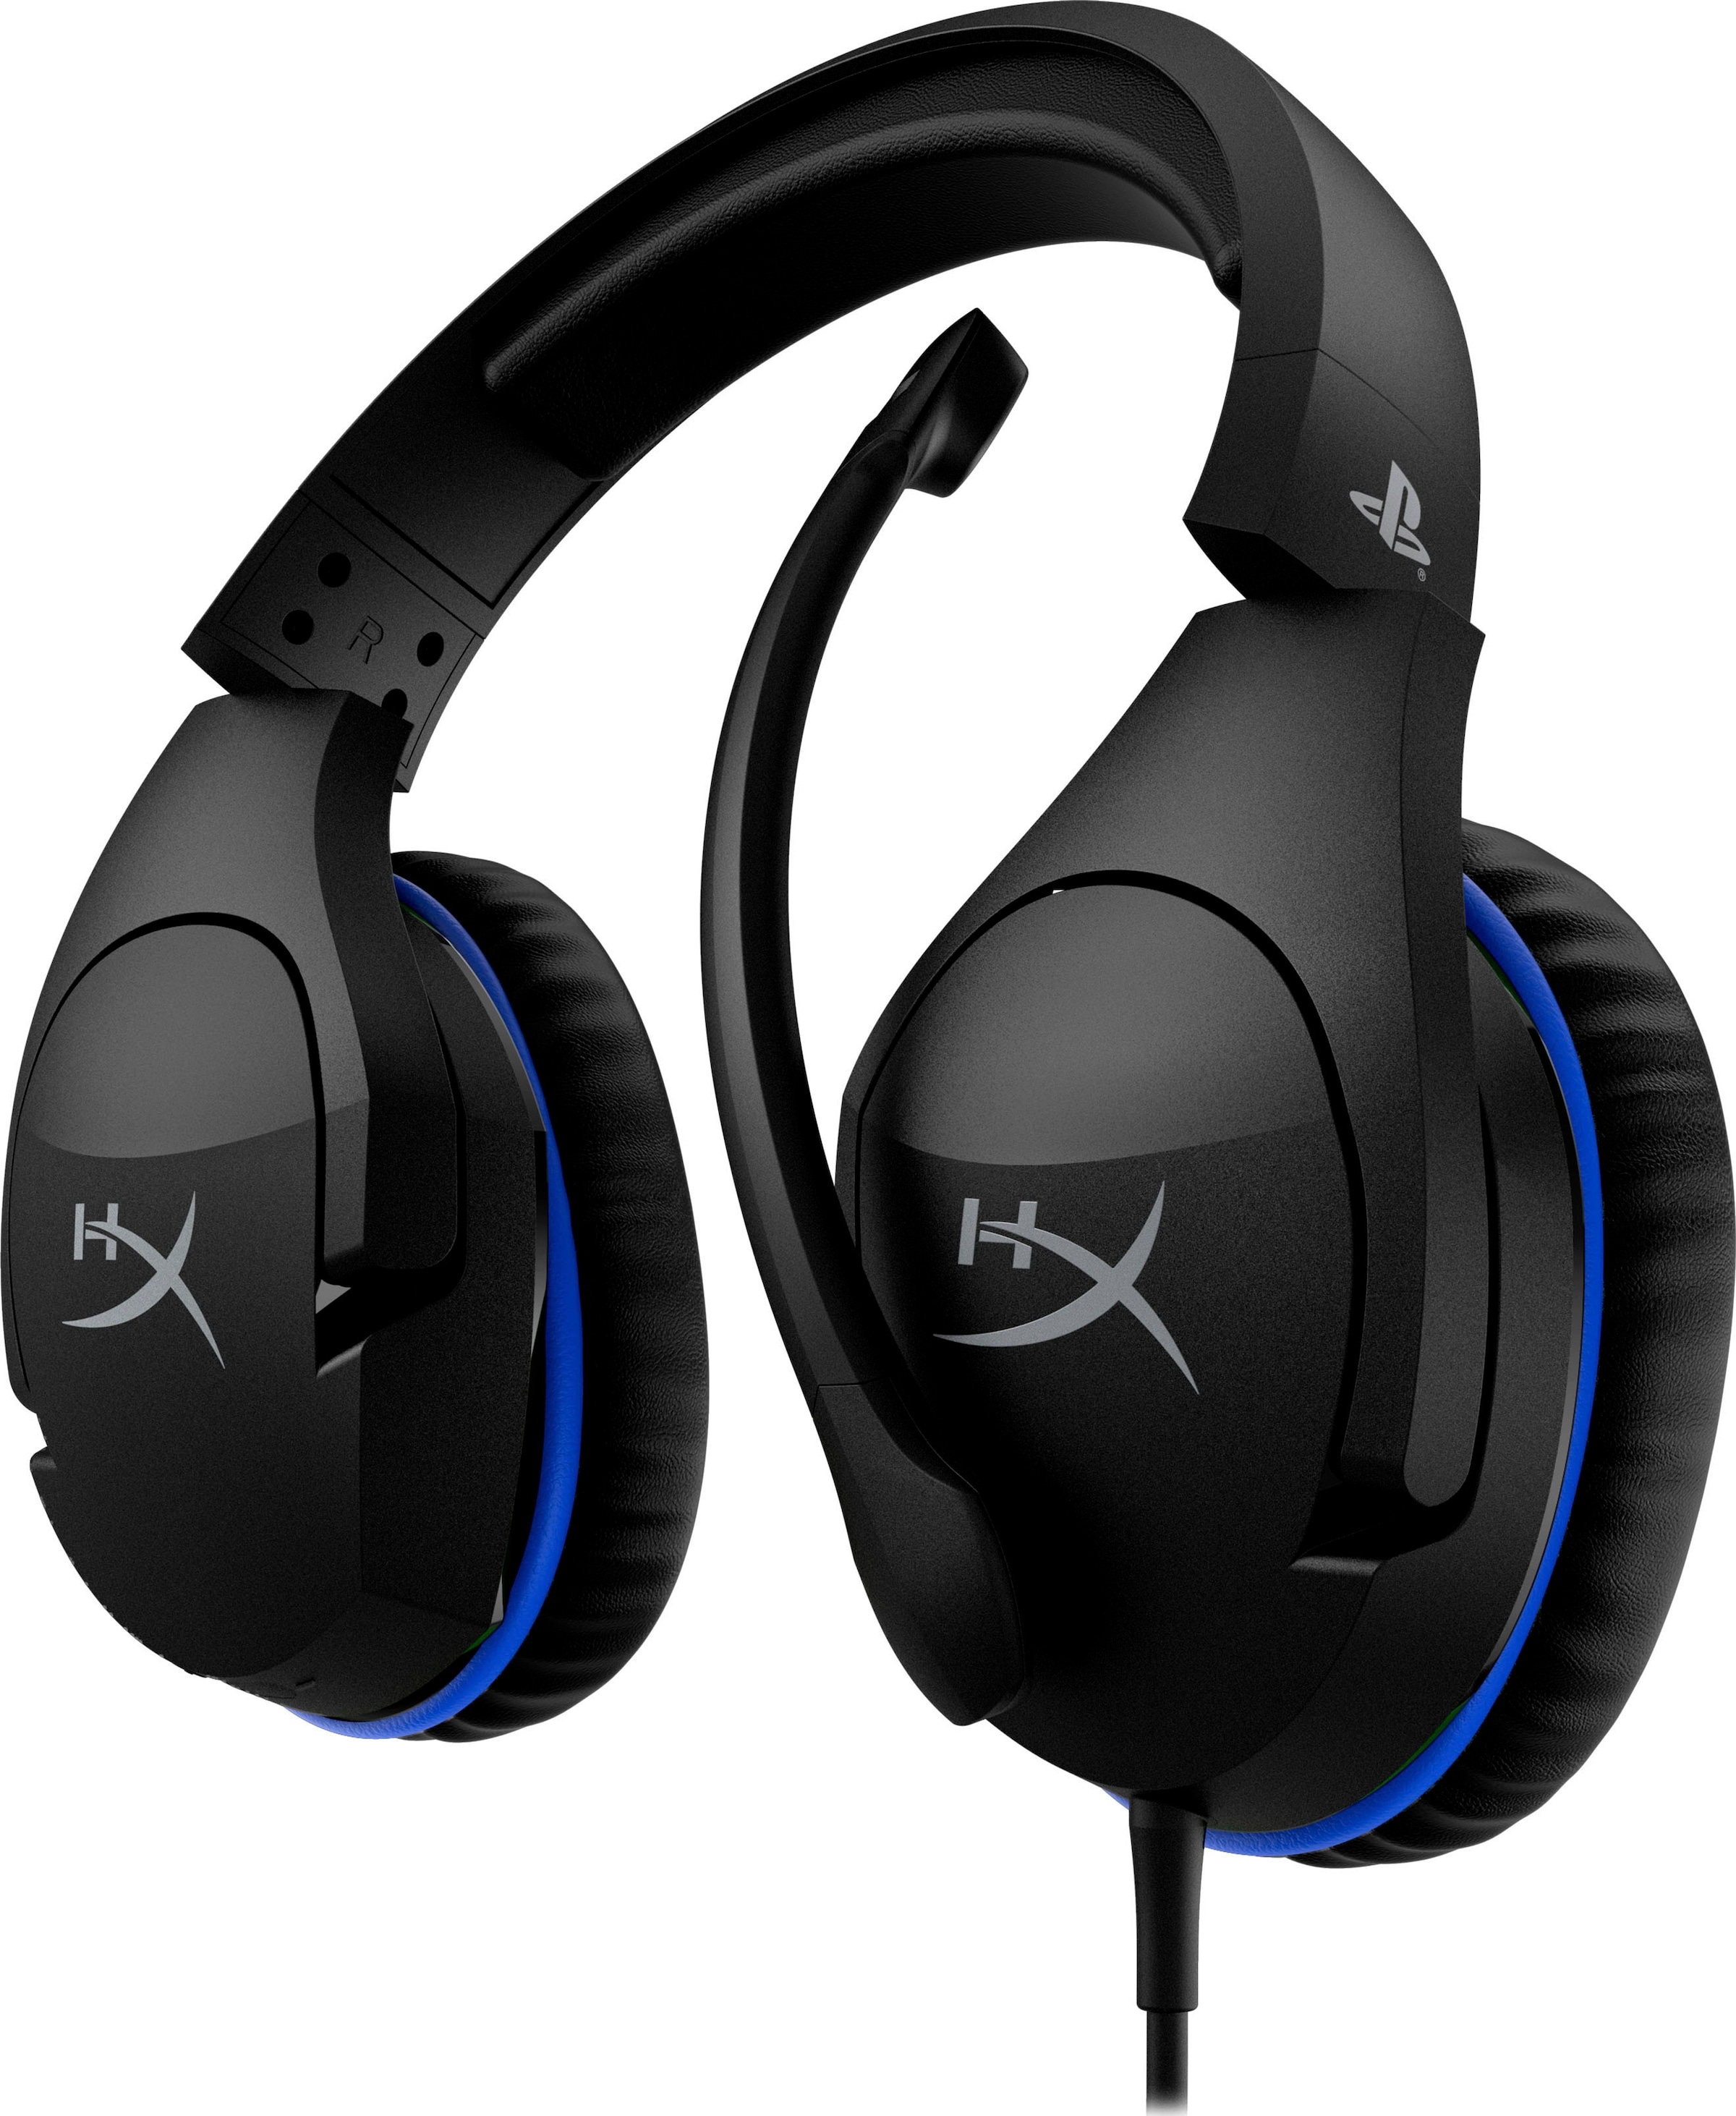 bei Stinger »Cloud Mikrofon OTTO Gaming-Headset abnehmbar jetzt (PS4 HyperX Licensed)«,